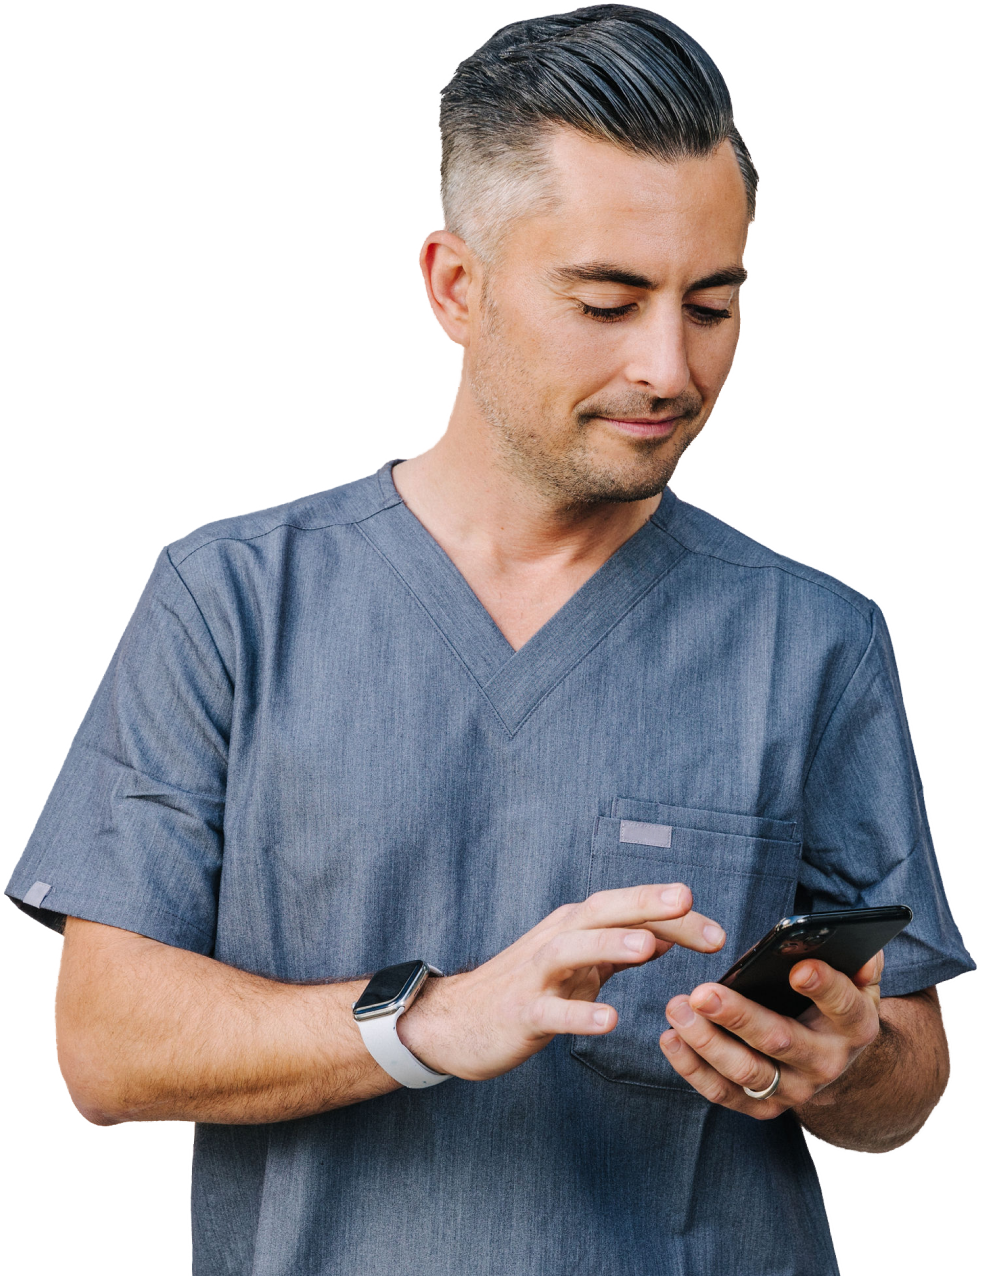 A healthcare professional in blue scrubs uses a smartphone